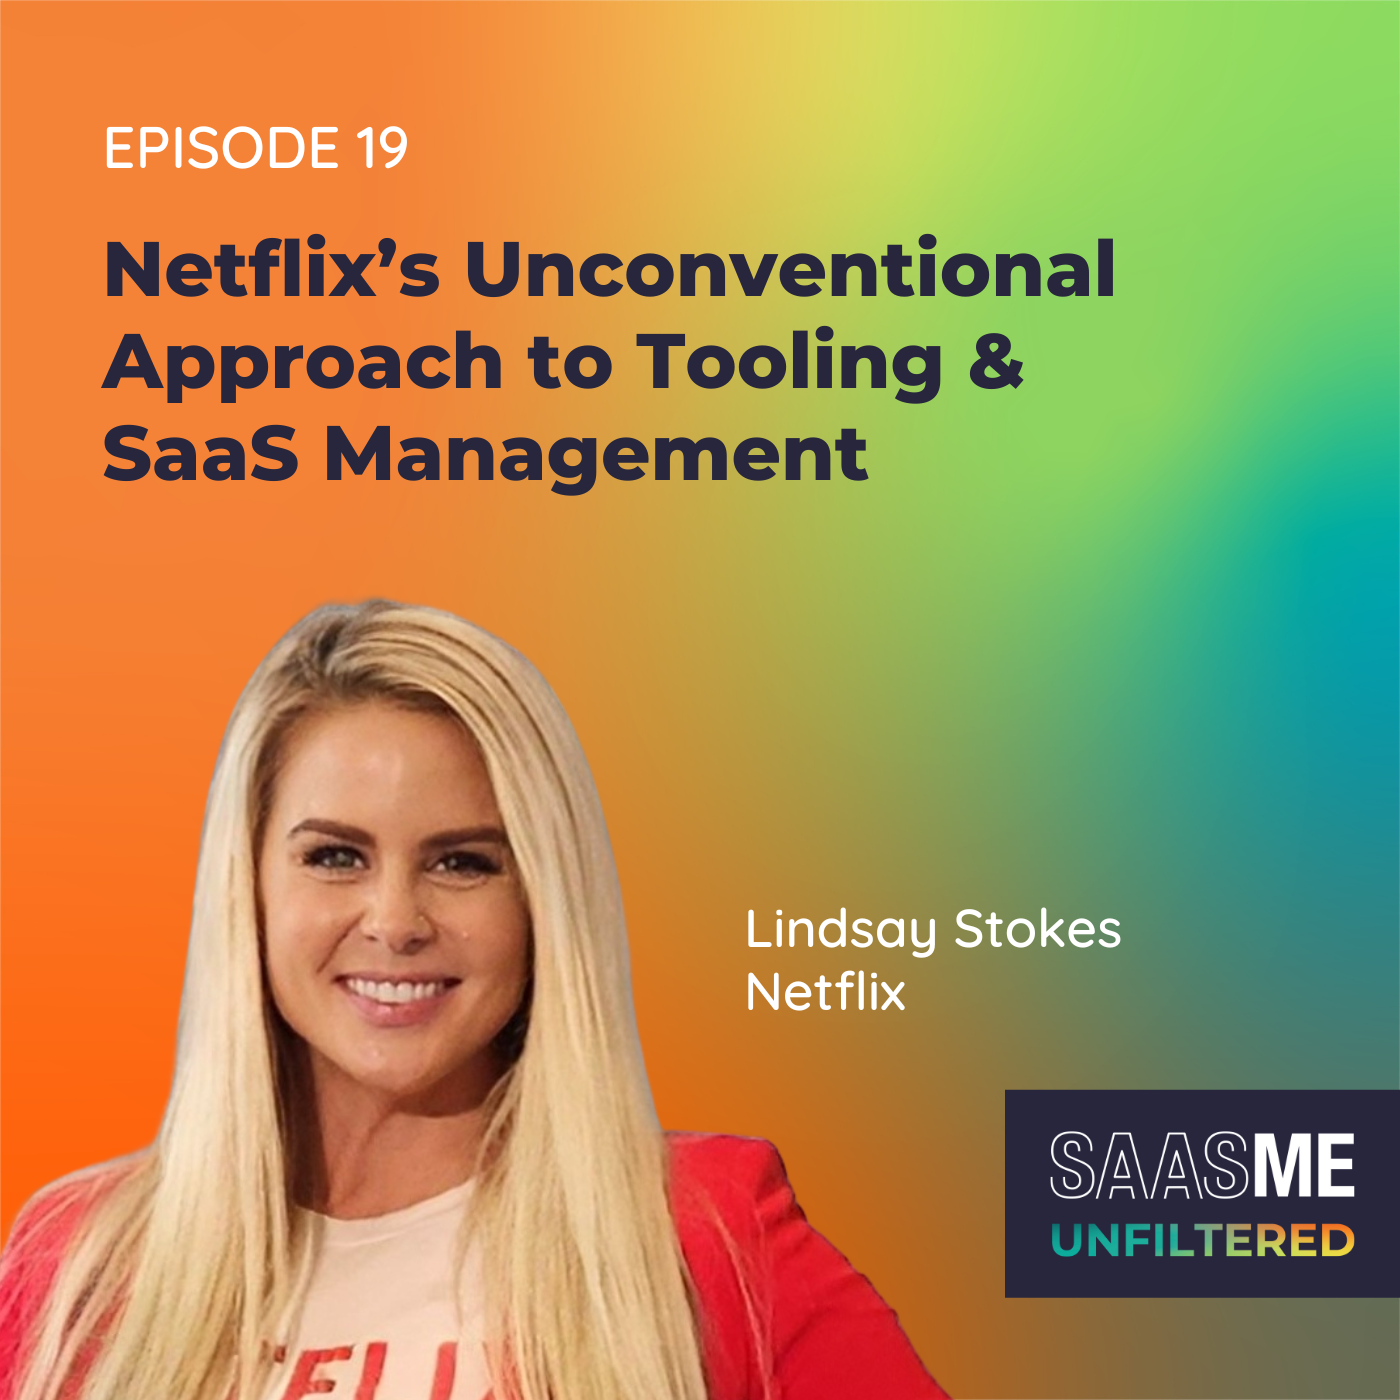 Lindsay Stokes: Netflix’s Unconventional Approach to Tooling and SaaS Management